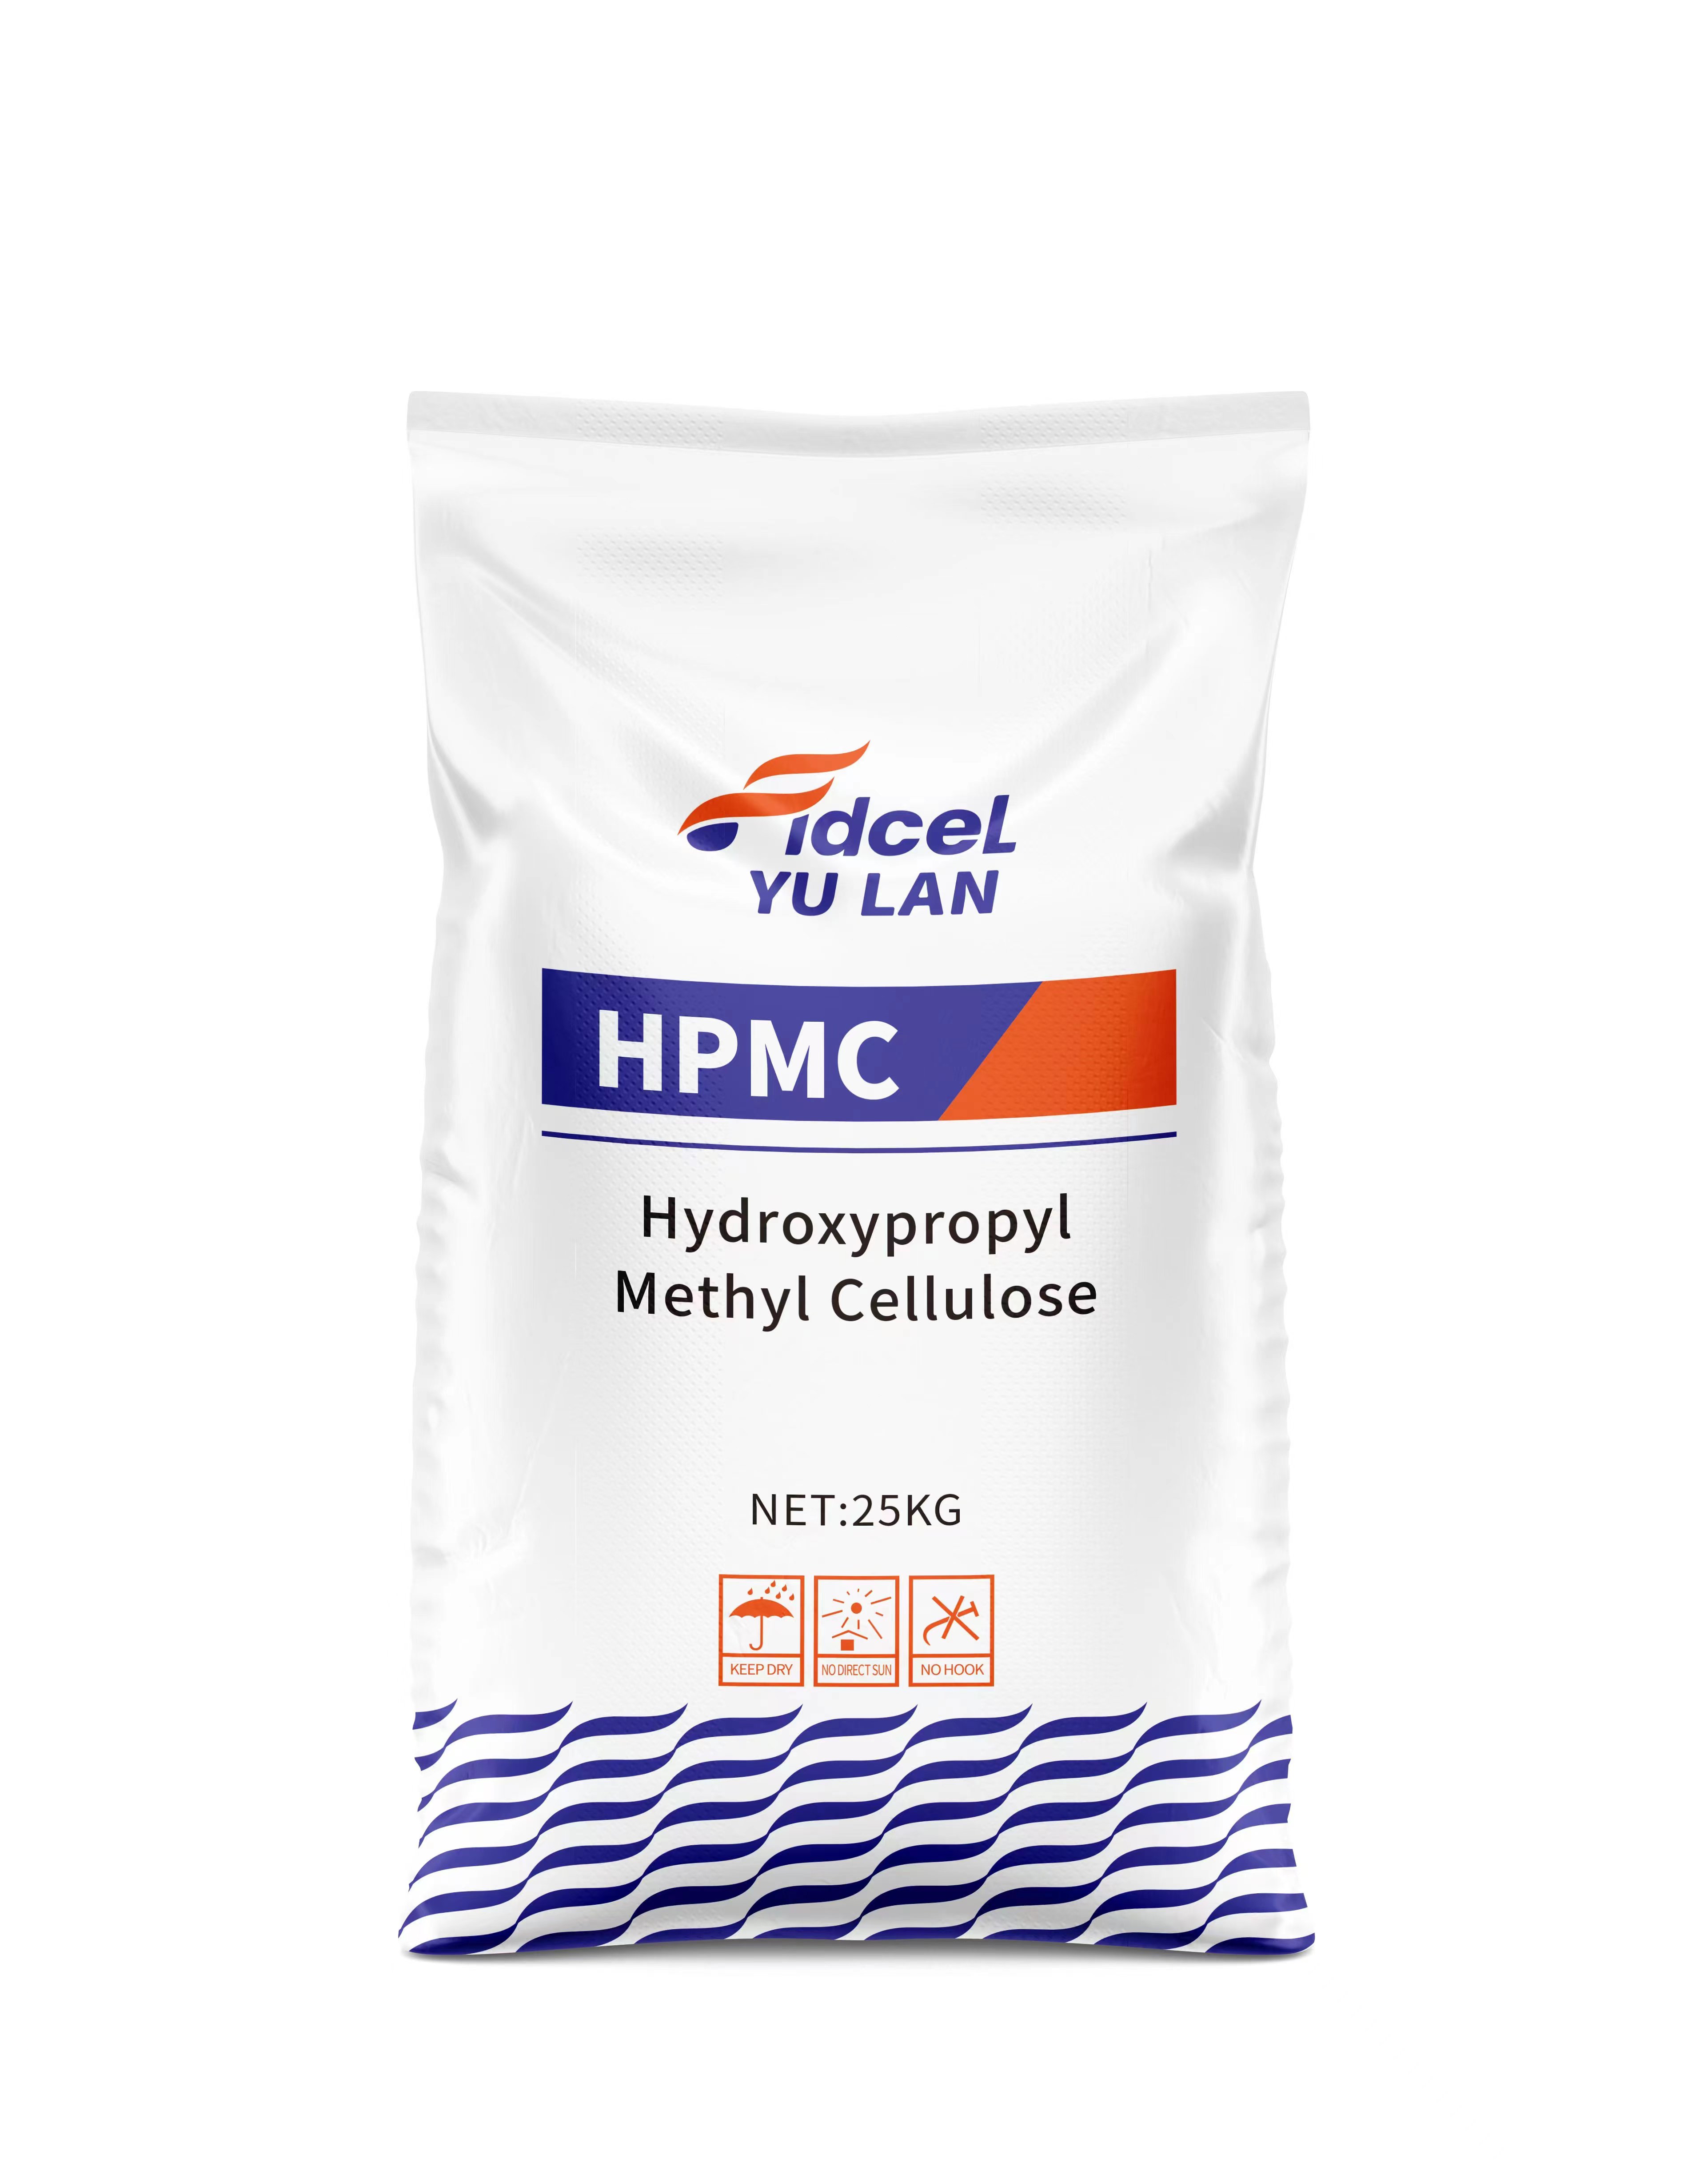 HPMC Chemical Manufacturing Hydroxypropyl Cellulose Chemical Hpmc